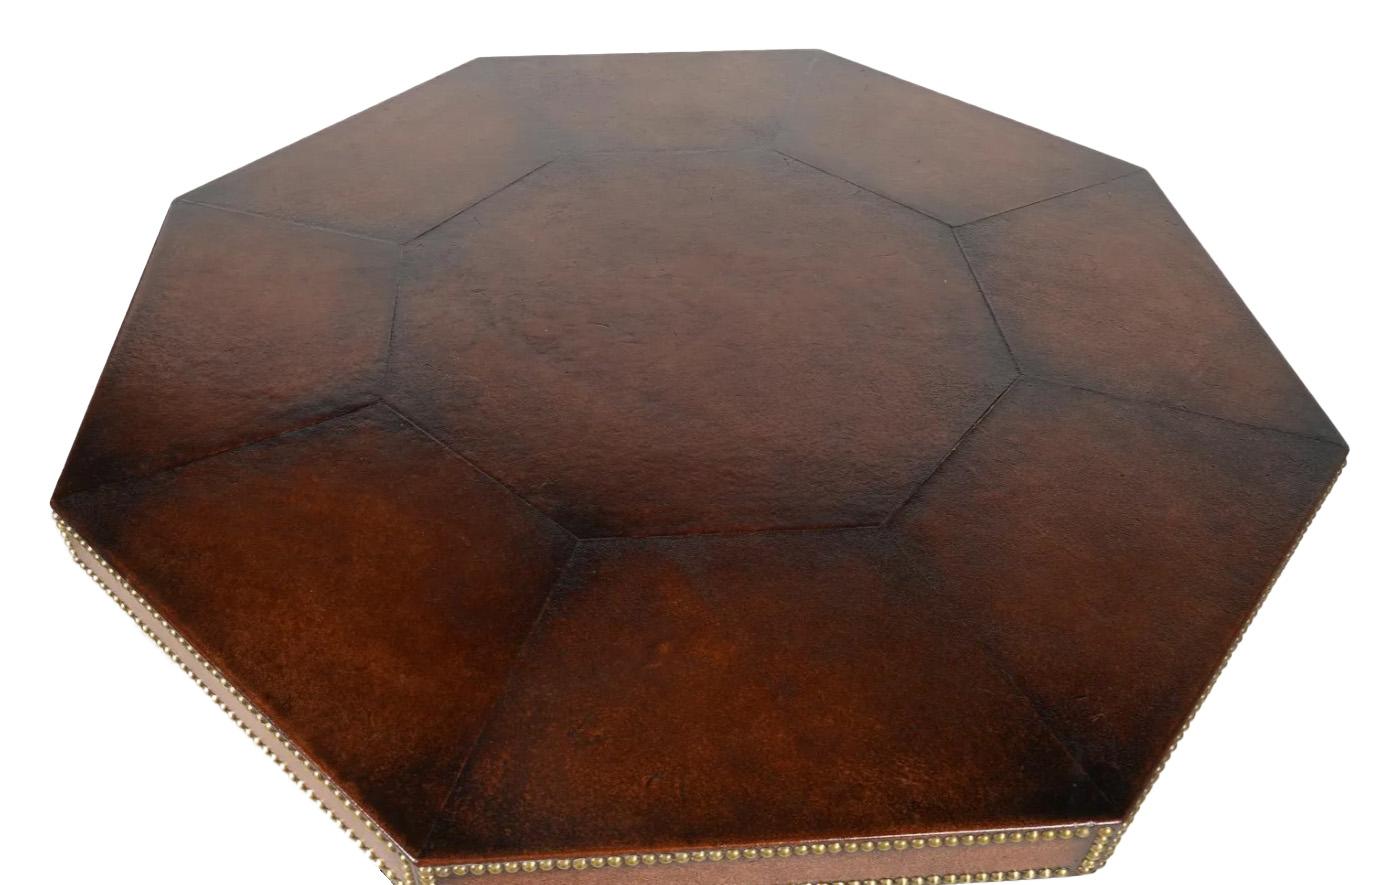 Handsome, Leather-clad game table. Octagonal-shaped top & base. Brass nail-head trim around table top sides & base in a pattern. Originally placed by Michael S. Smith in Jim Belushi's Brentwood estate. Michael S Smith is one of the most sought out